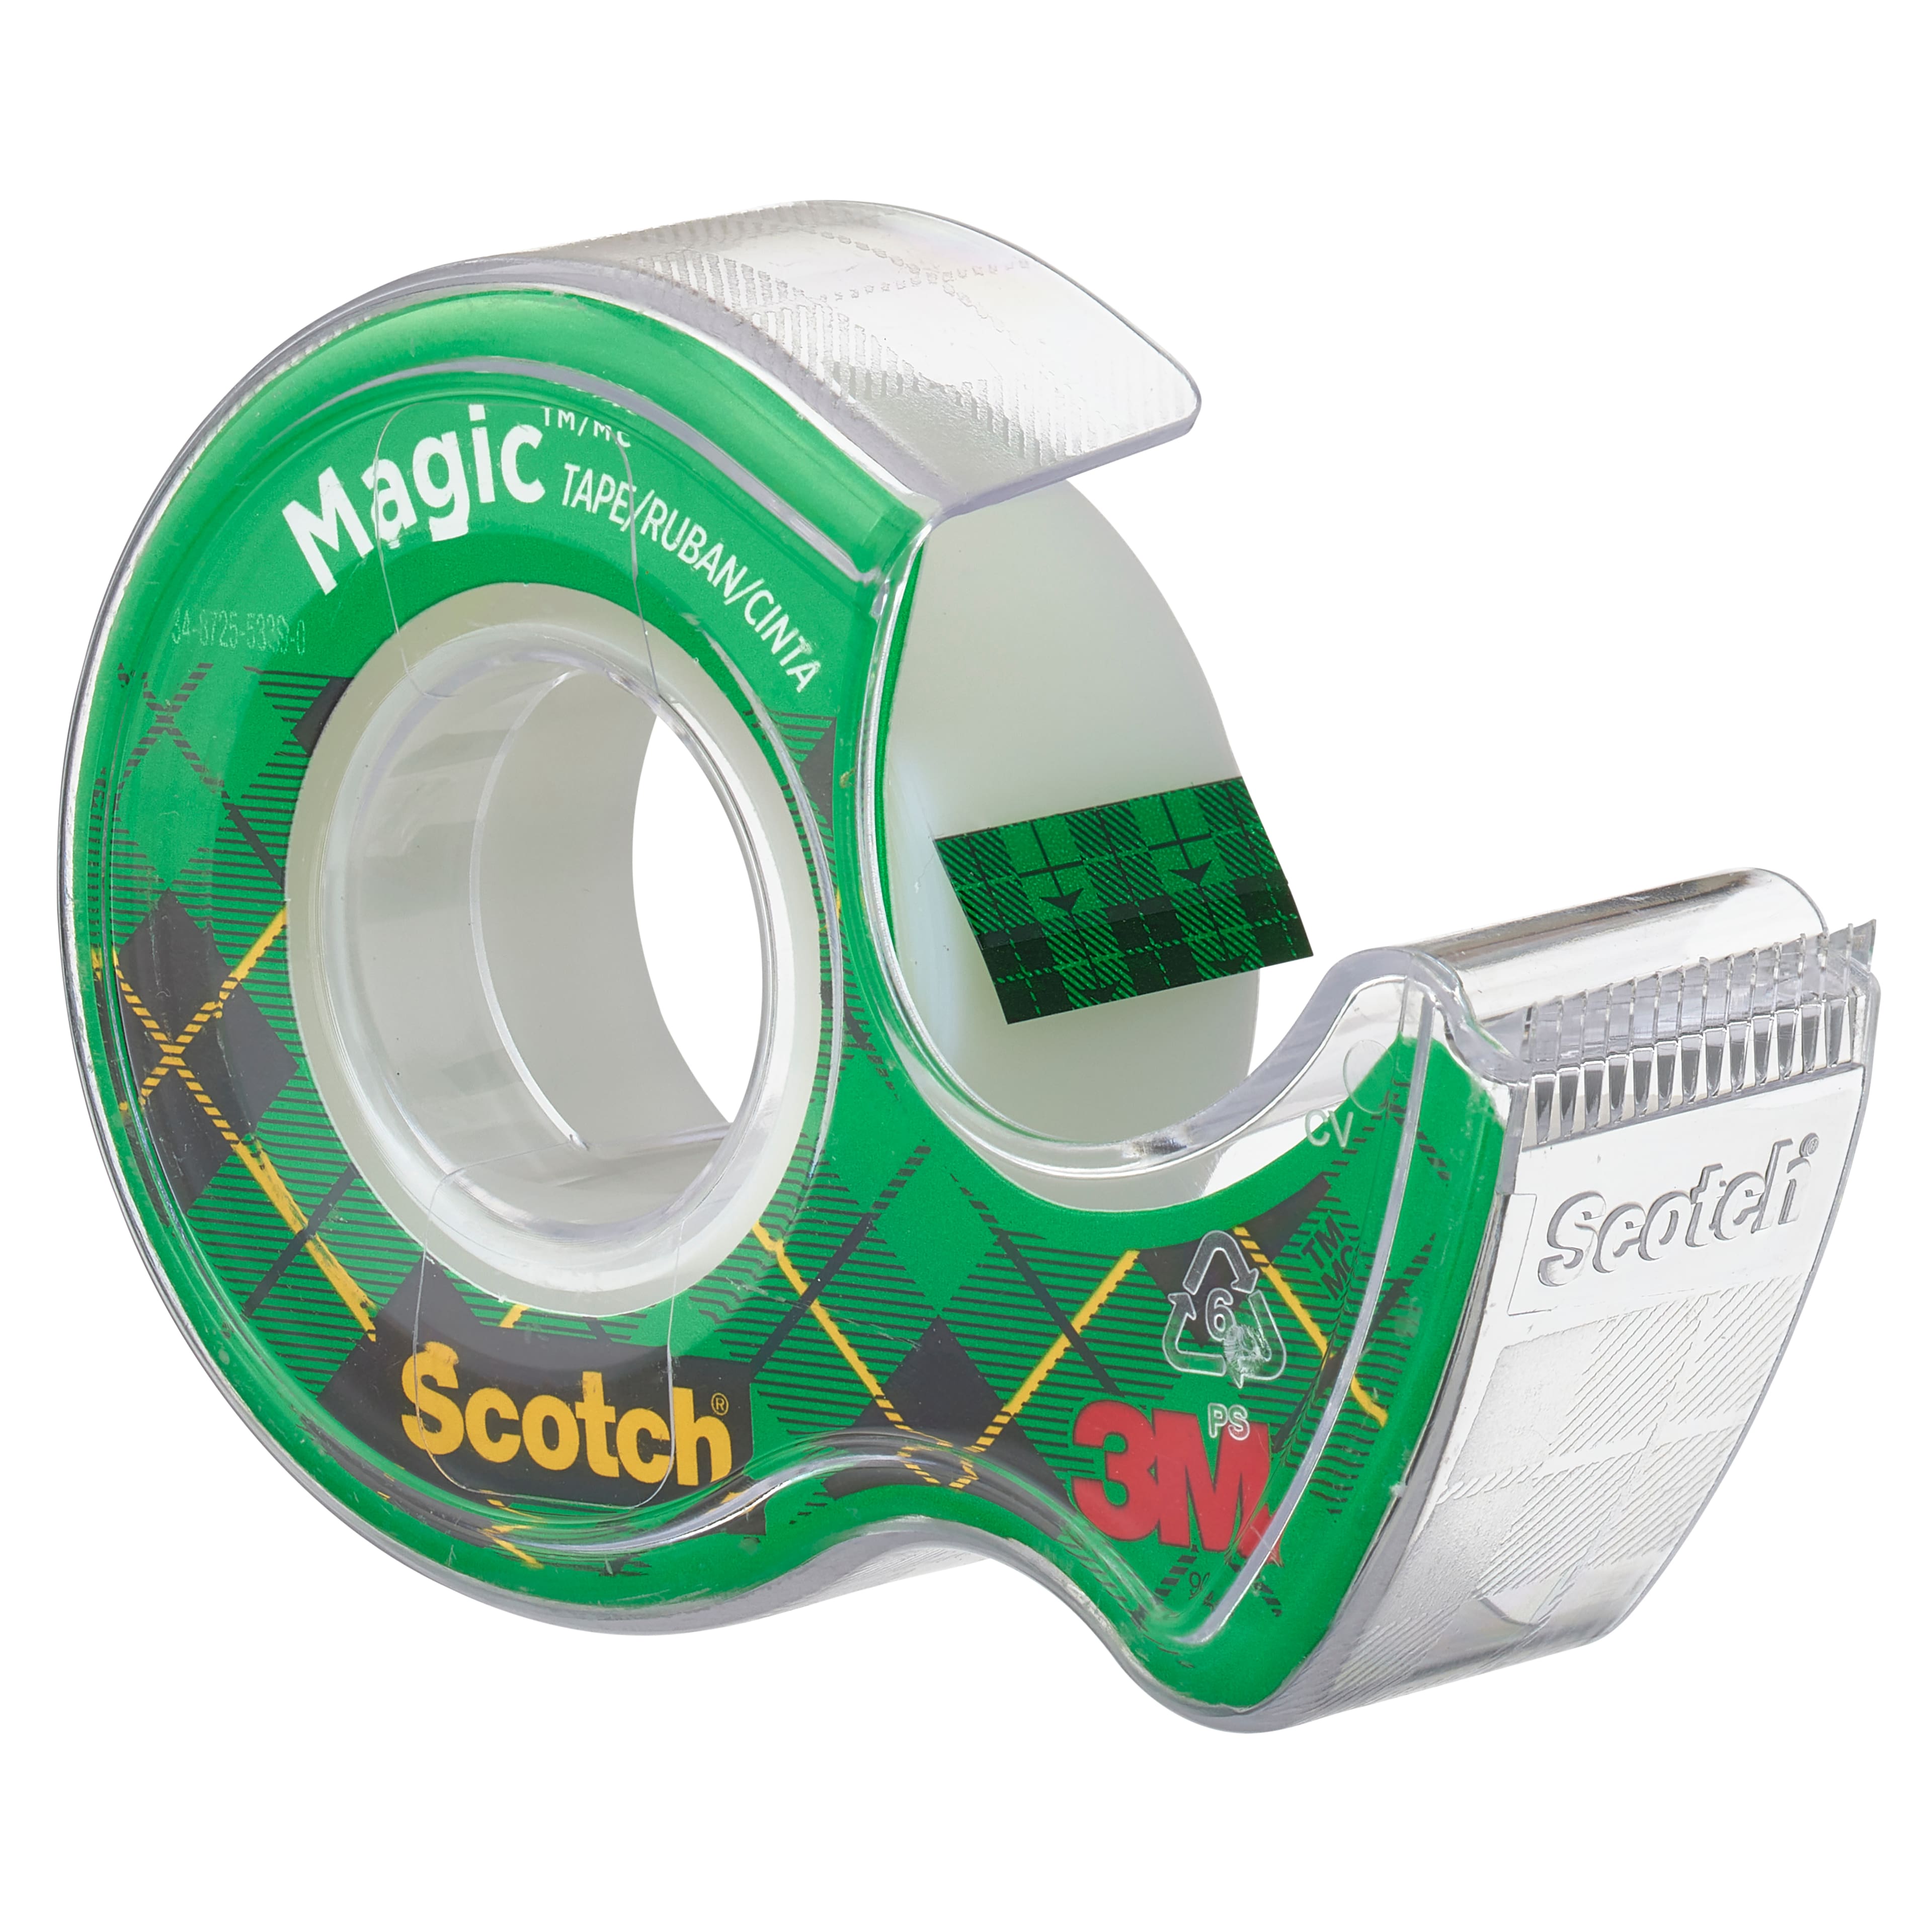 Scotch Magic Tape, Refill Pack, 3 Rolls, 19 mm x 25 m - General Purpose  Sticky Tape for Document Repair, Labelling & Sealing